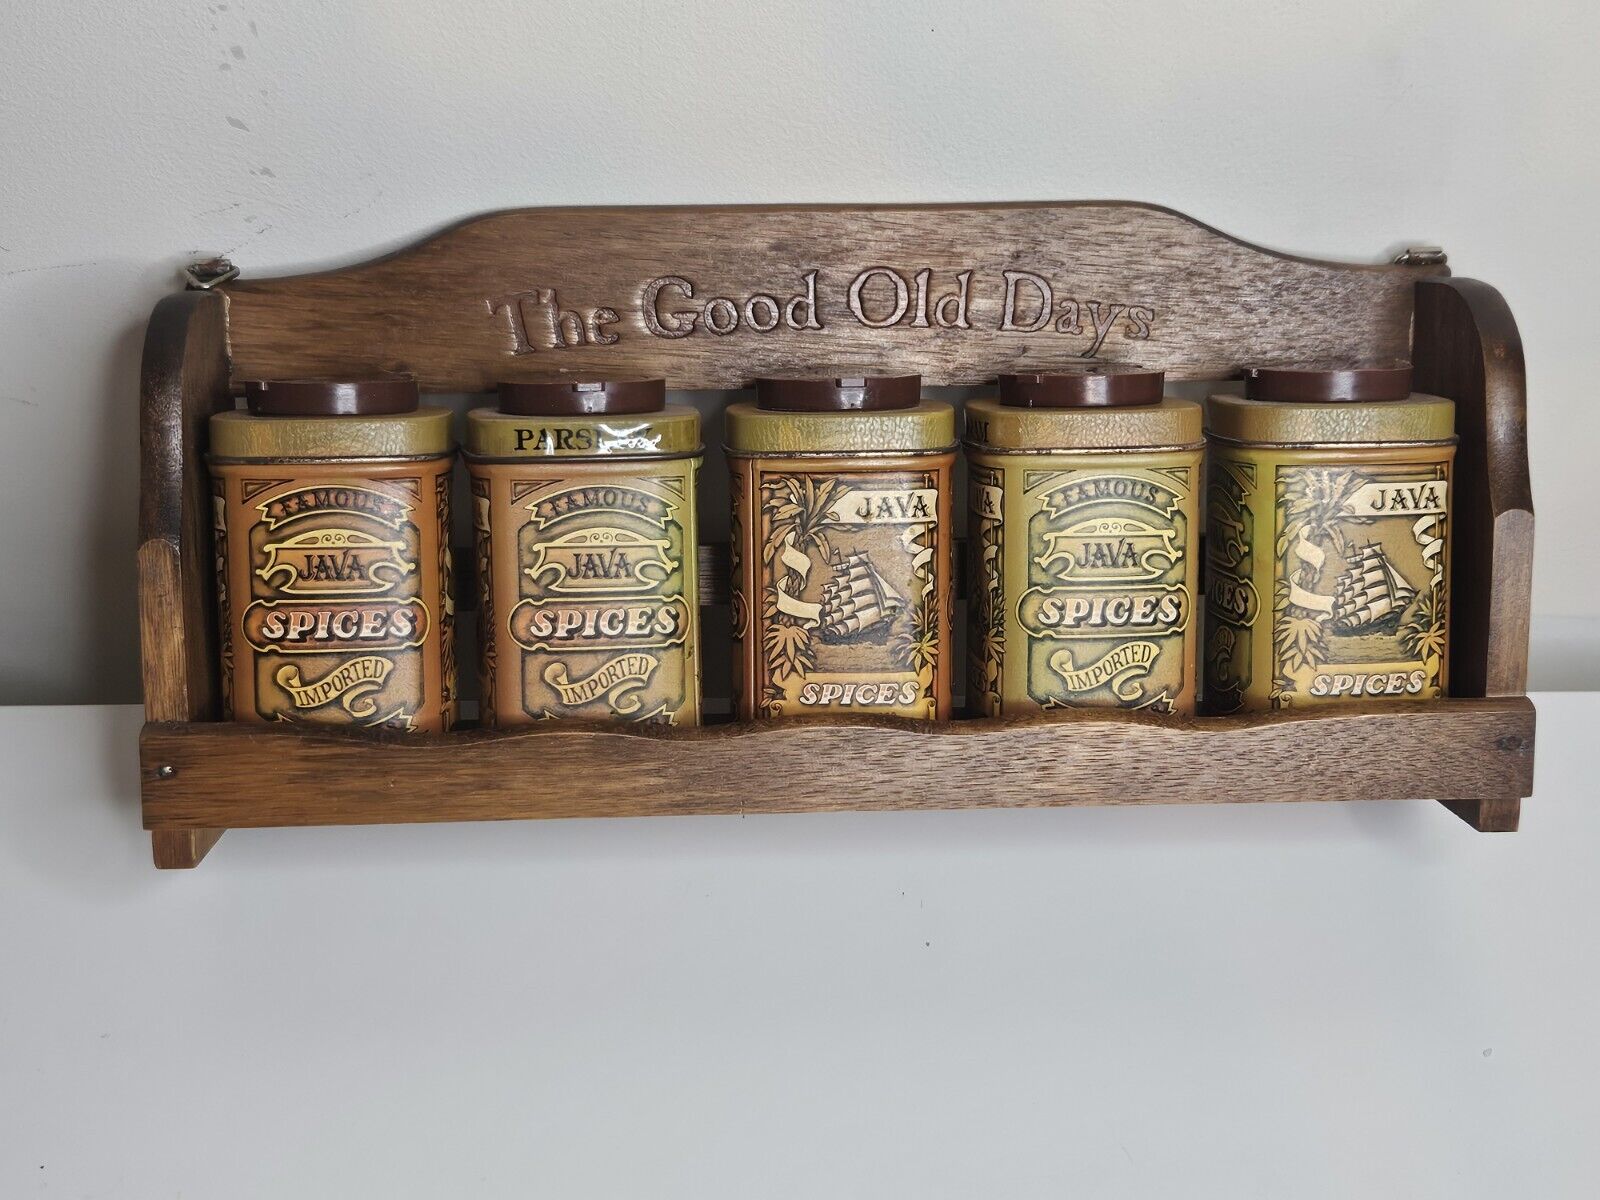 Vintage Tin Spice Containers On Wood Spice Rack